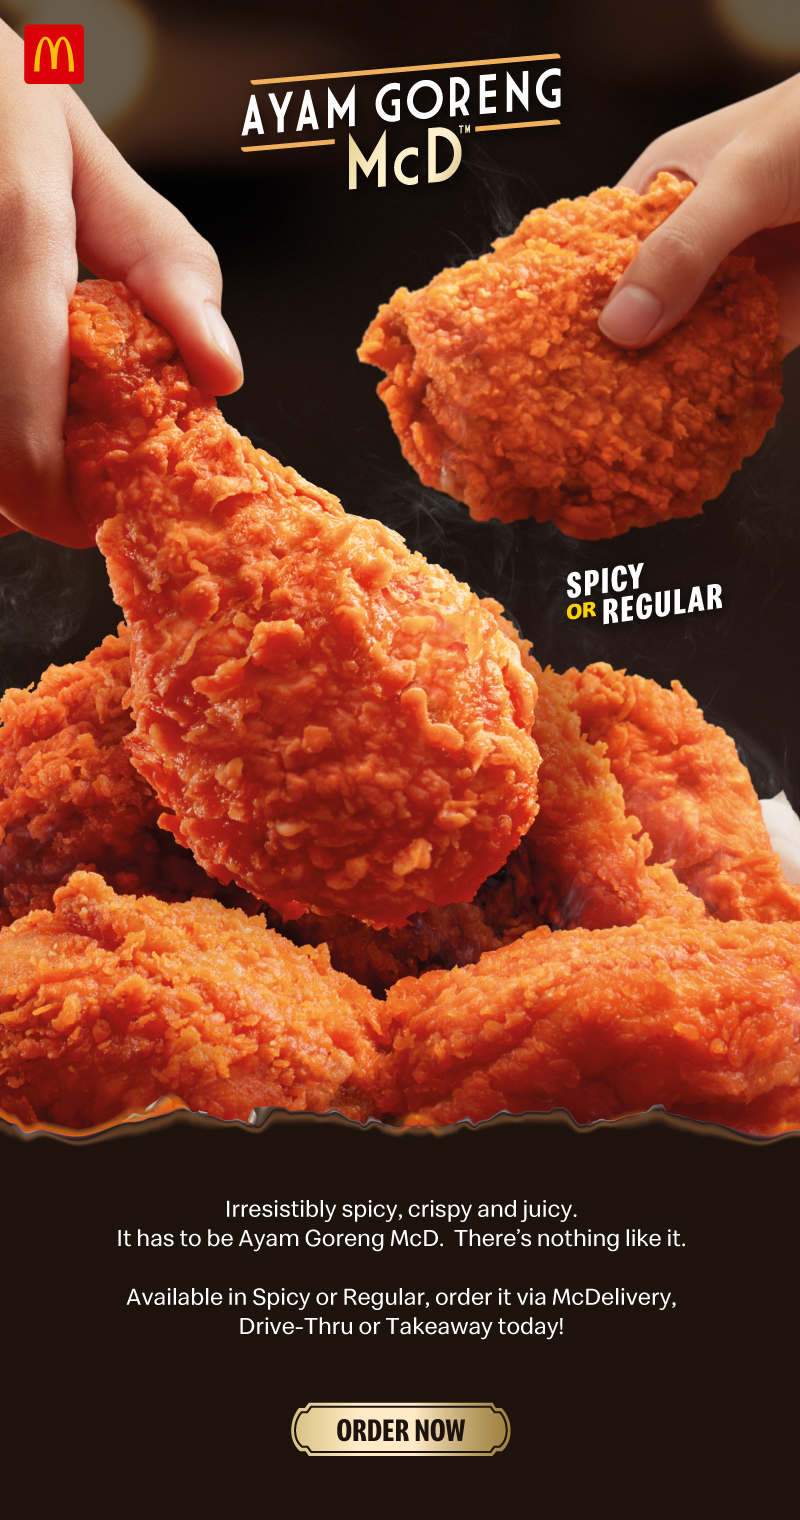 Irresistibly spicy, crispy and juicy. It has to be Ayam Goreng McD. There’s nothing like it. 